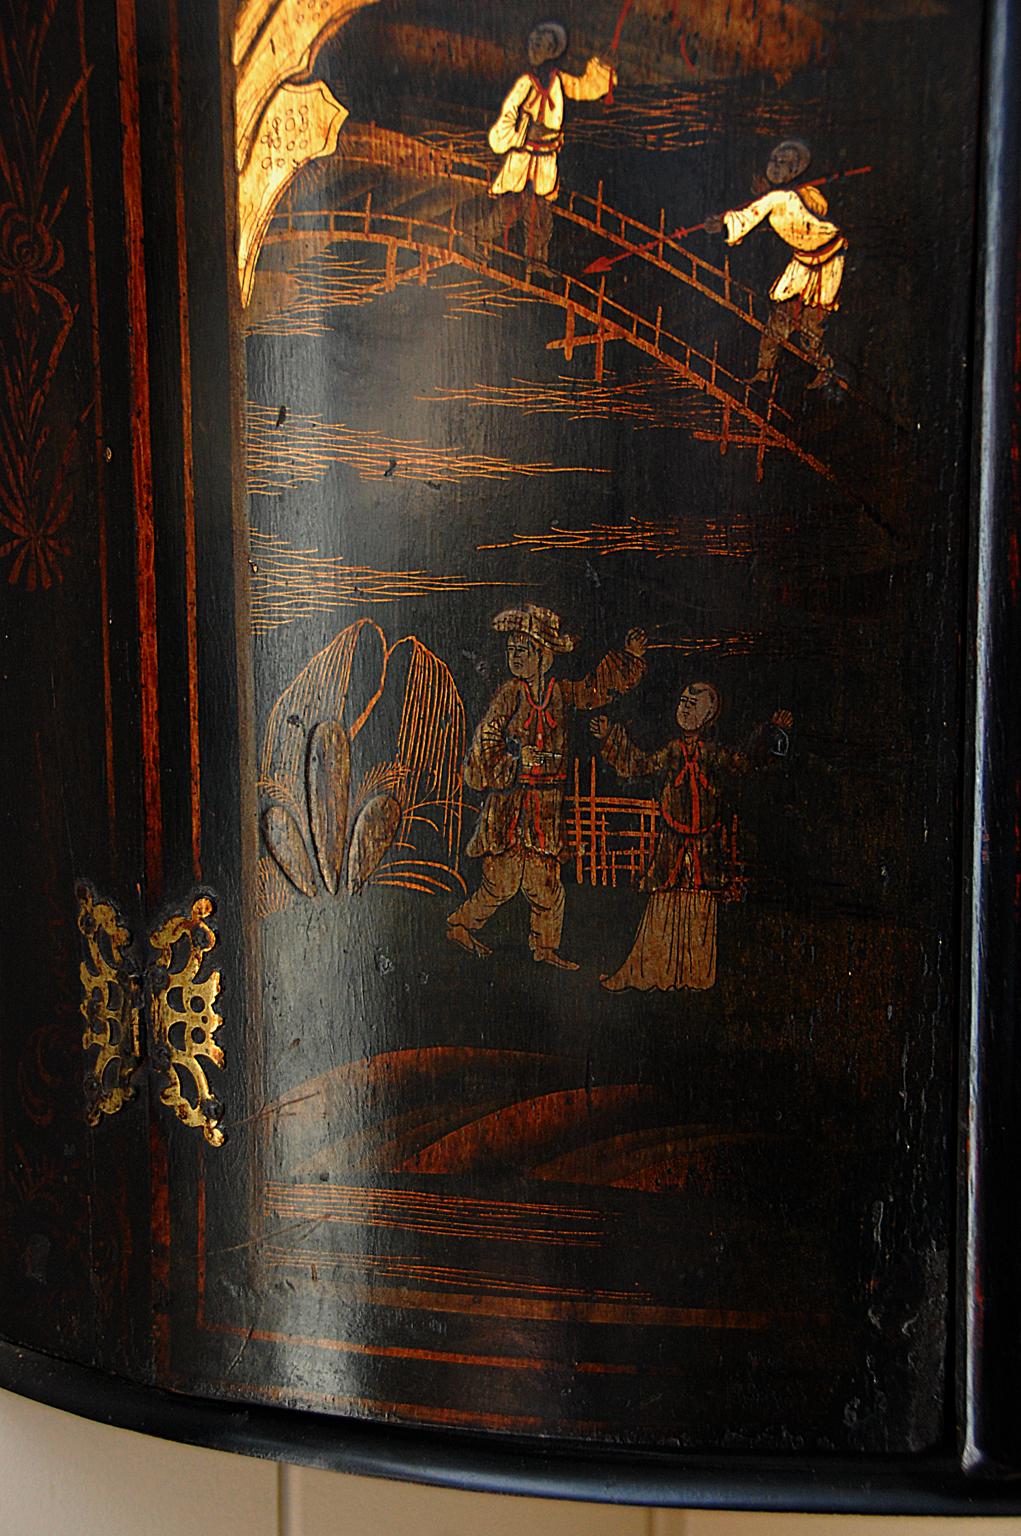 English 18th century chinoiserie decorated hanging bowfronted corner cupboard with shaped interior shelves. The original decoration has many hand painted scenes, among them: young men fishing-one with a spear the other with a rod-from an arched